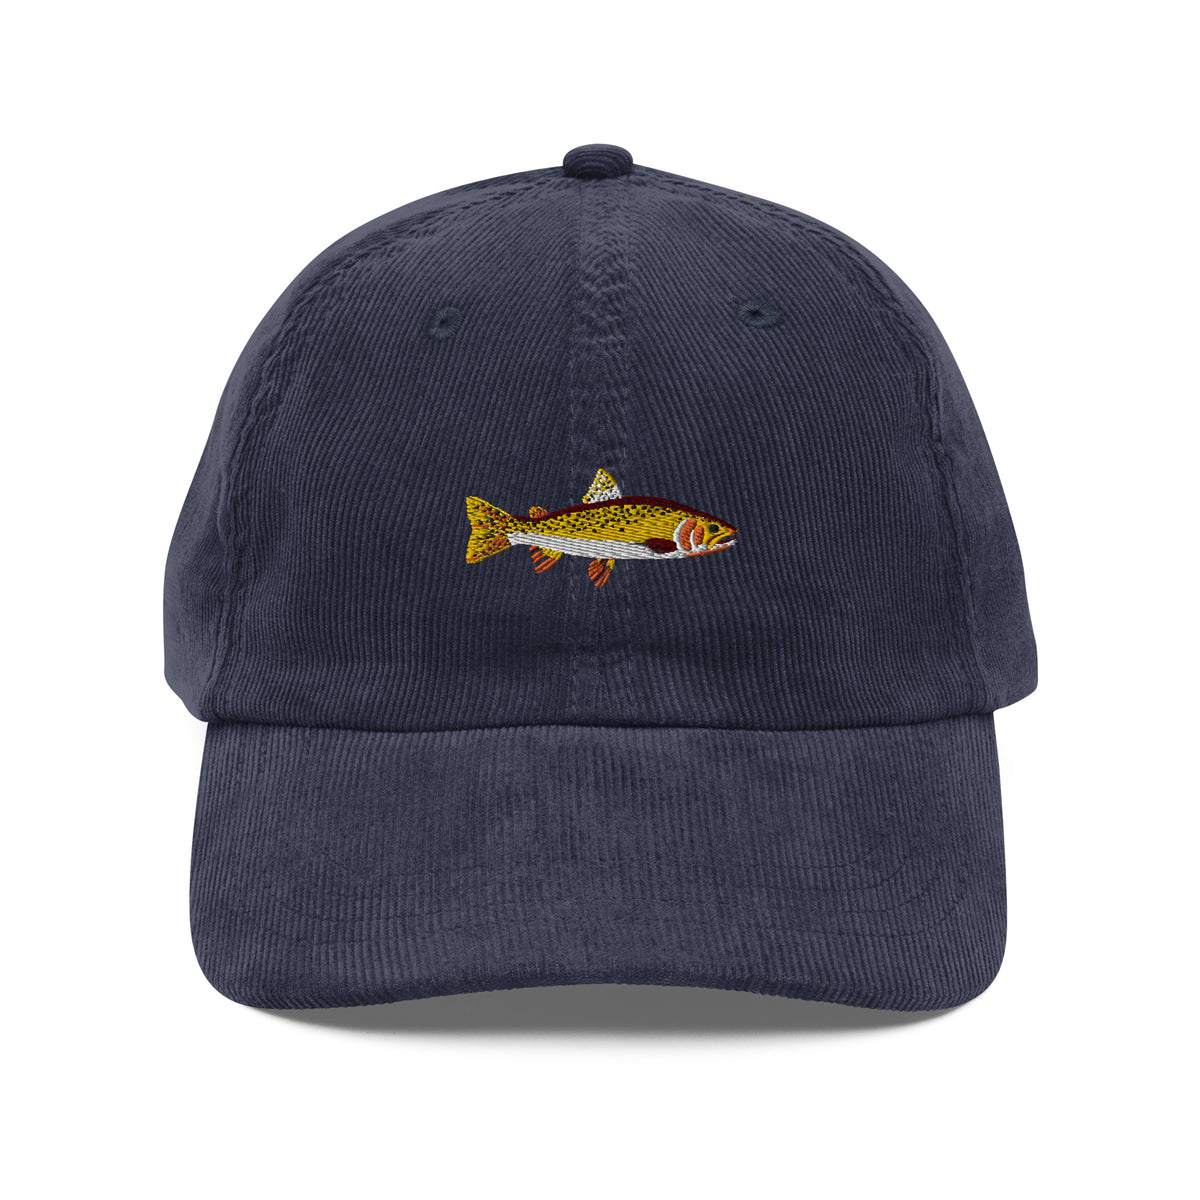 Yellowstone Cutthroat Embroidered Corduroy Dad Hat